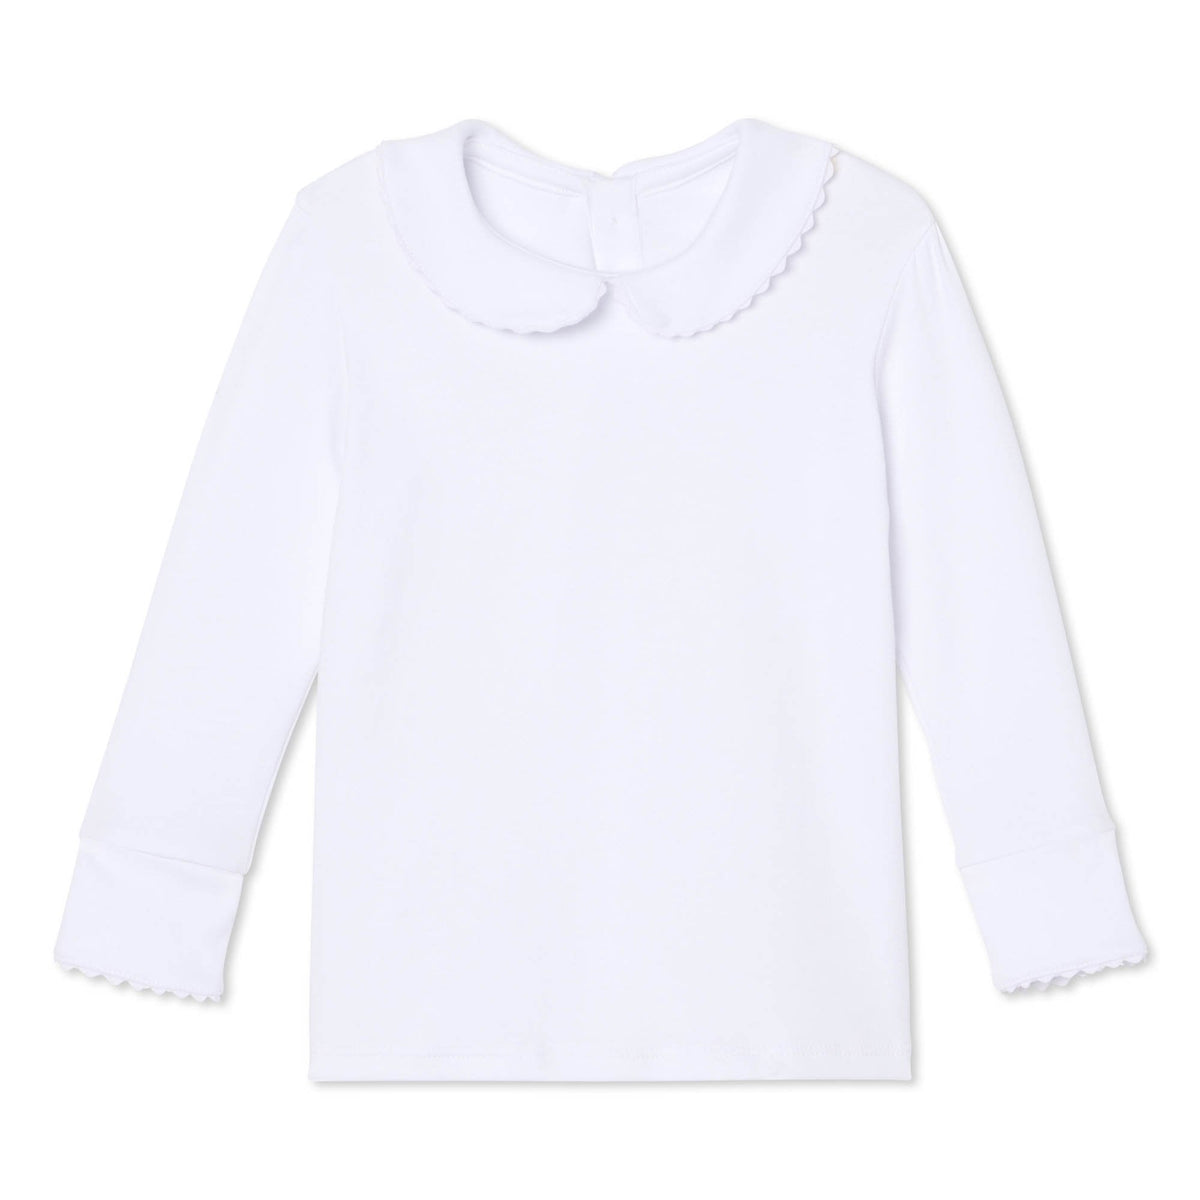 Classic and Preppy Isabelle Long Sleeve Peter Pan Shirt, White Ric Rac-Shirts and Tops-Bright White with Bright White Ric Rac-2T-CPC - Classic Prep Childrenswear